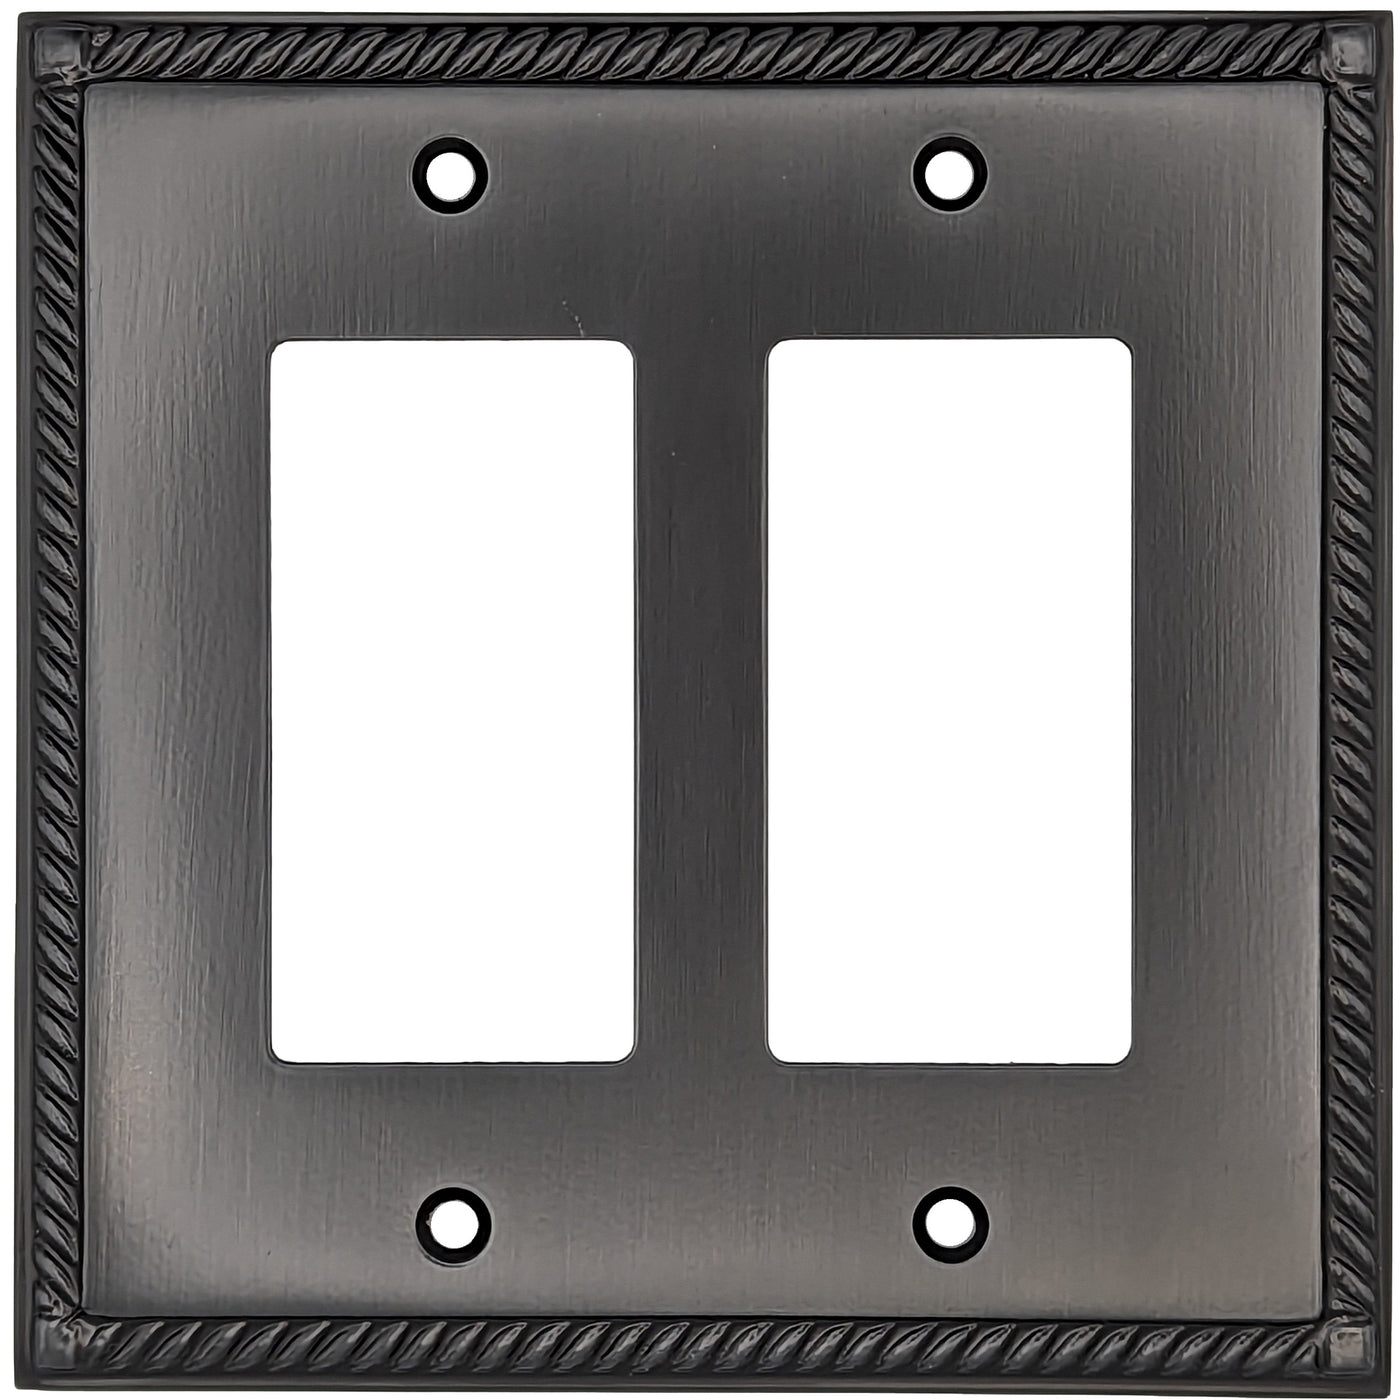 English Georgian Roped Wall Plate (Oil Rubbed Bronze)